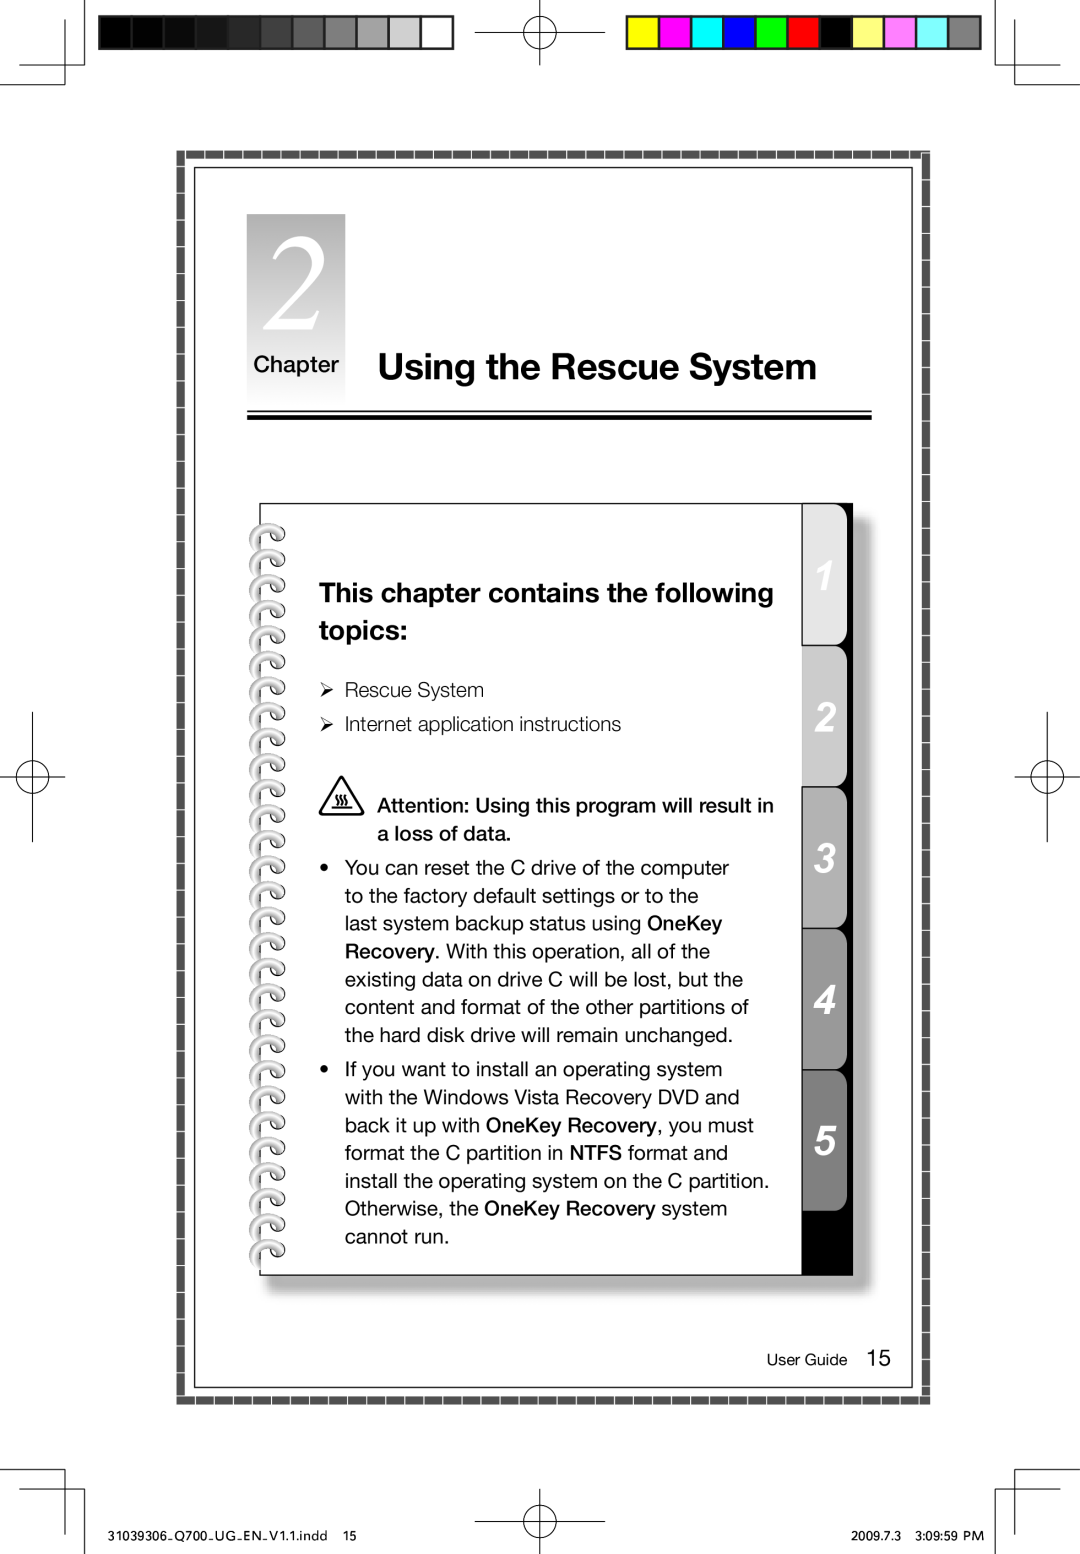 Lenovo Q700 manual Chapter Using the Rescue System, This chapter contains the following topics 